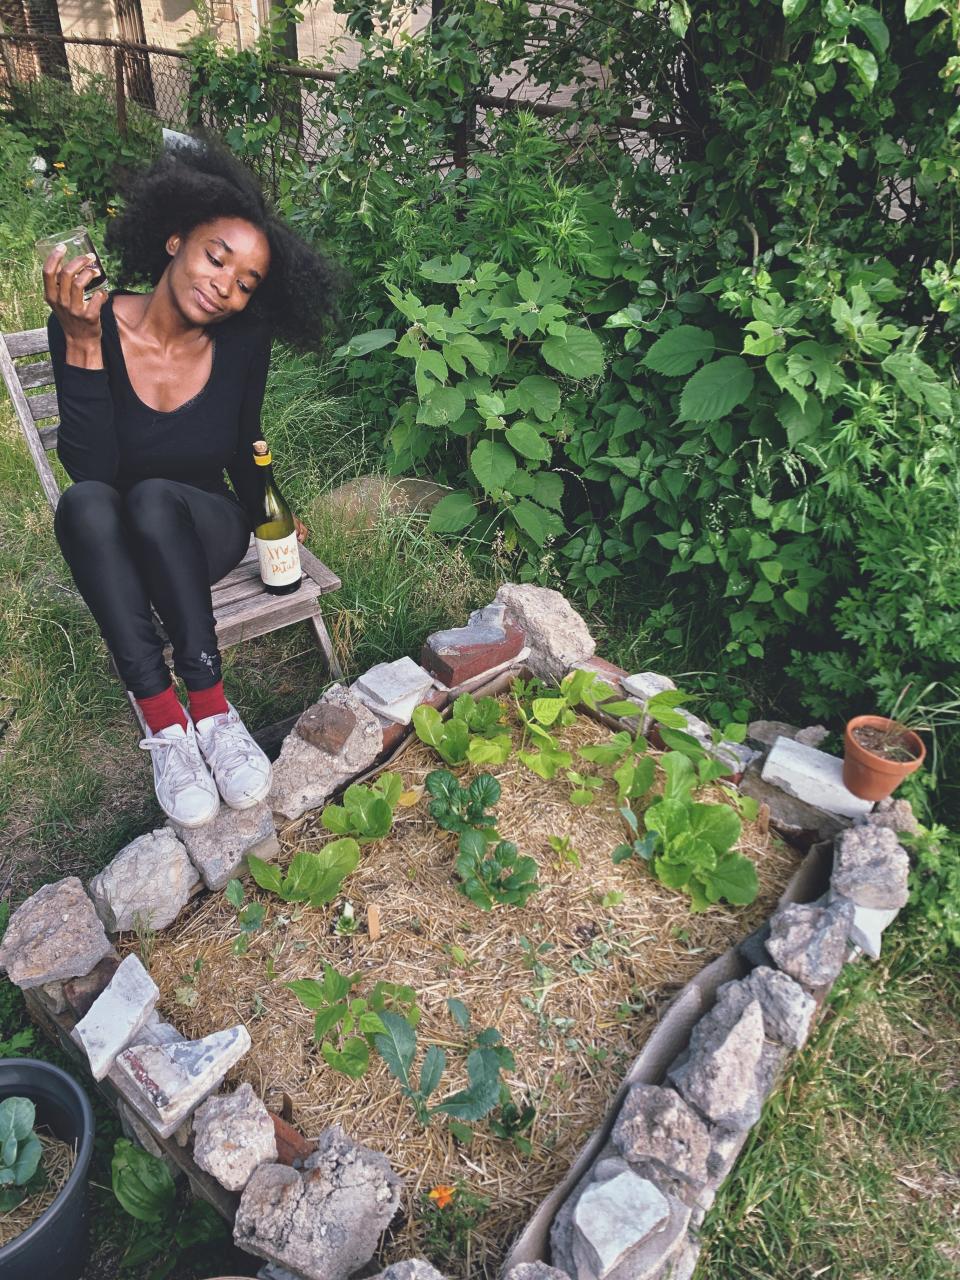 Brionna Jimerson sits by one of her raised garden beds in Brooklyn, N.Y. "There is something inherently powerful about being able to produce and cultivate something with your own two hands," Jimerson says.